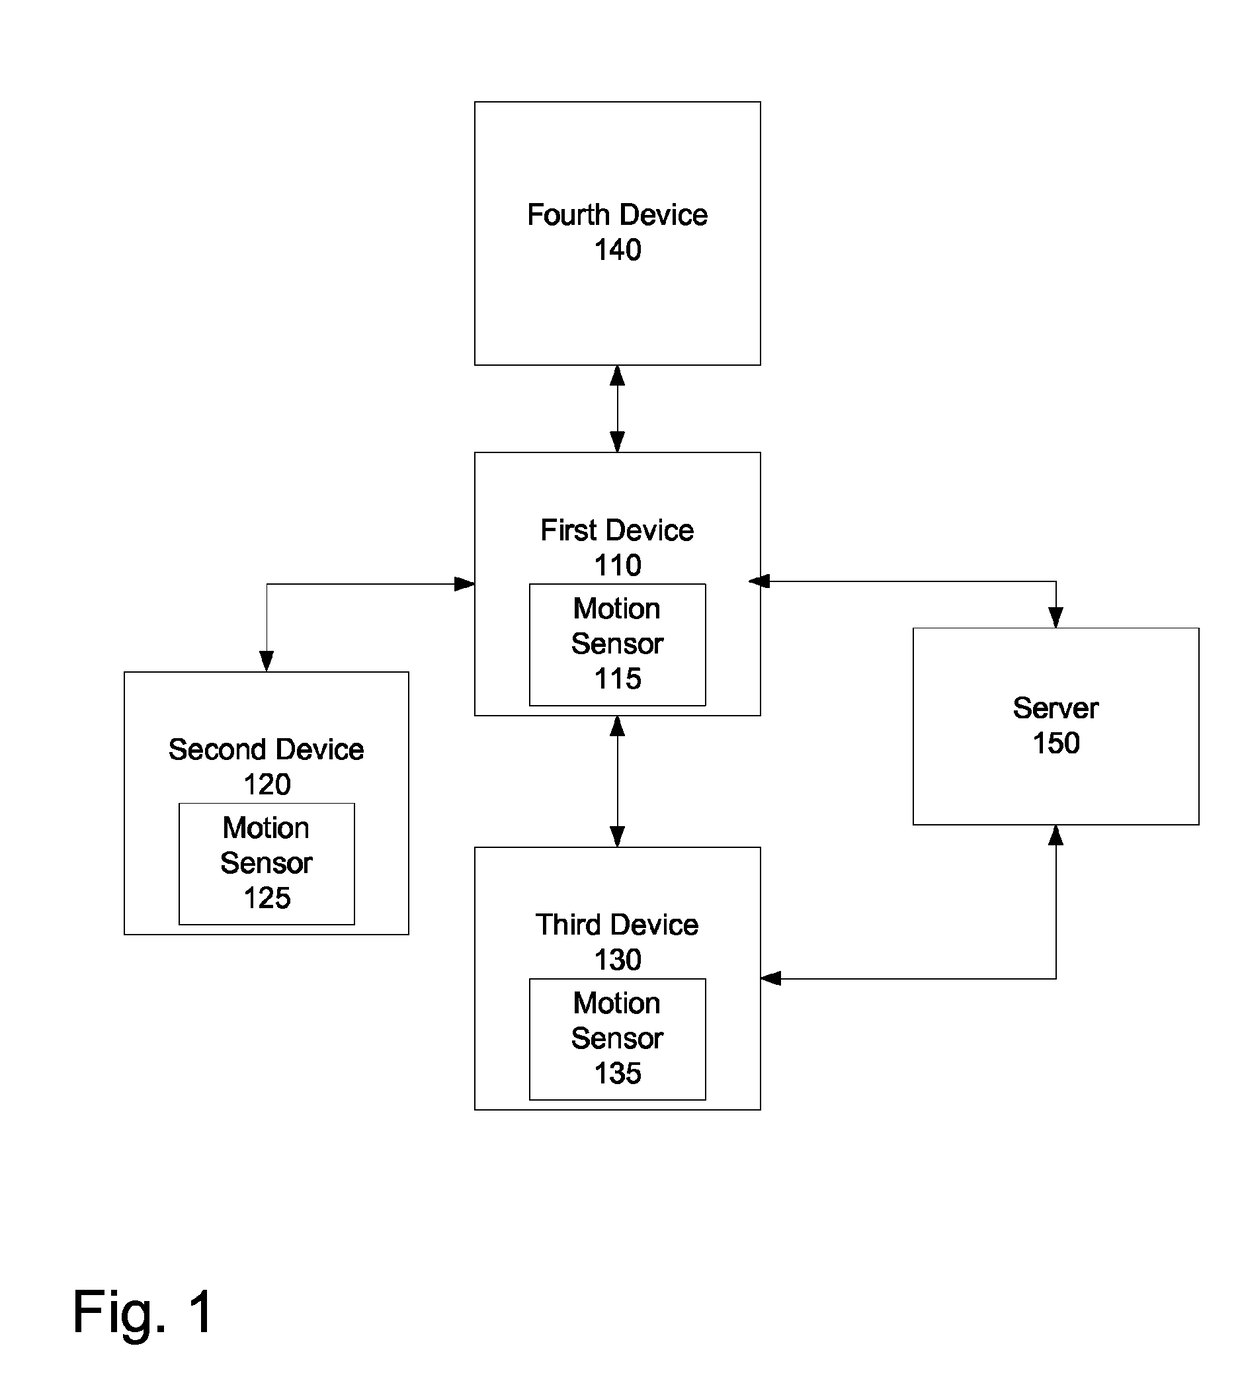 Method and apparatus to enable pairing of devices